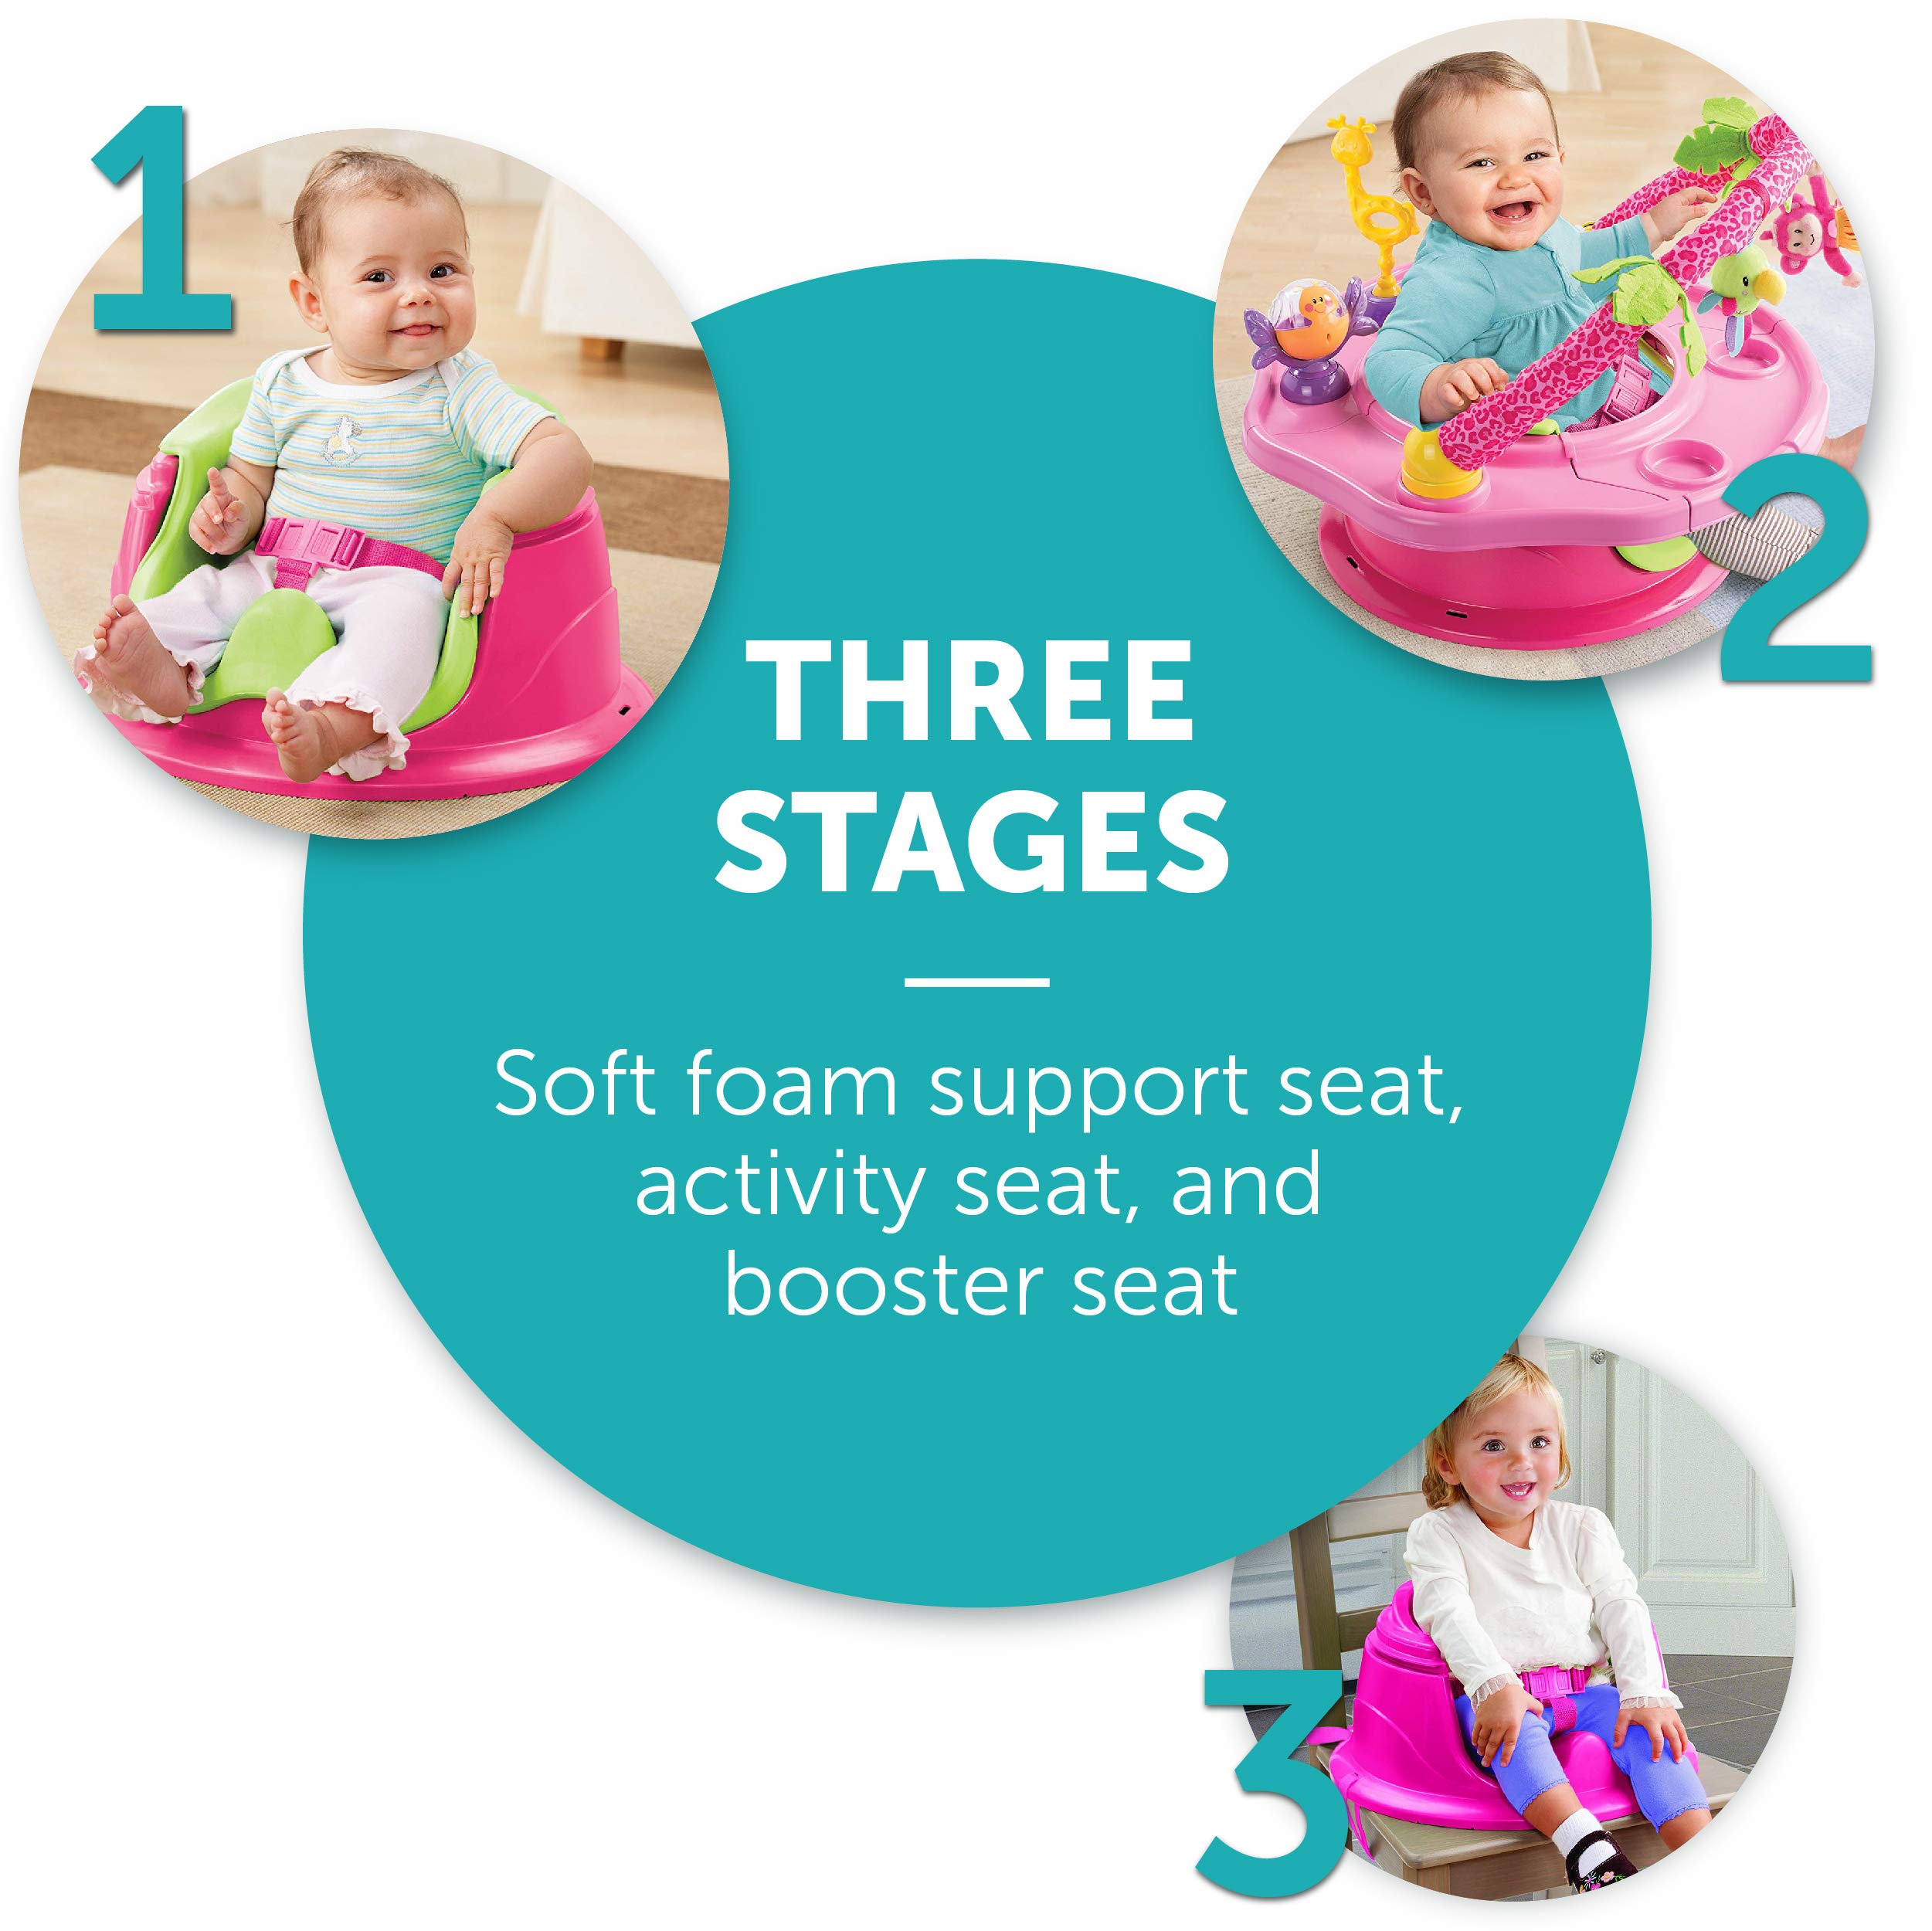 Summer® Deluxe SuperSeat®, Island Giggles, Fun Baby Seat for Sitting Up, Playtime, and Meals, Ages 4 Months to 4 Years